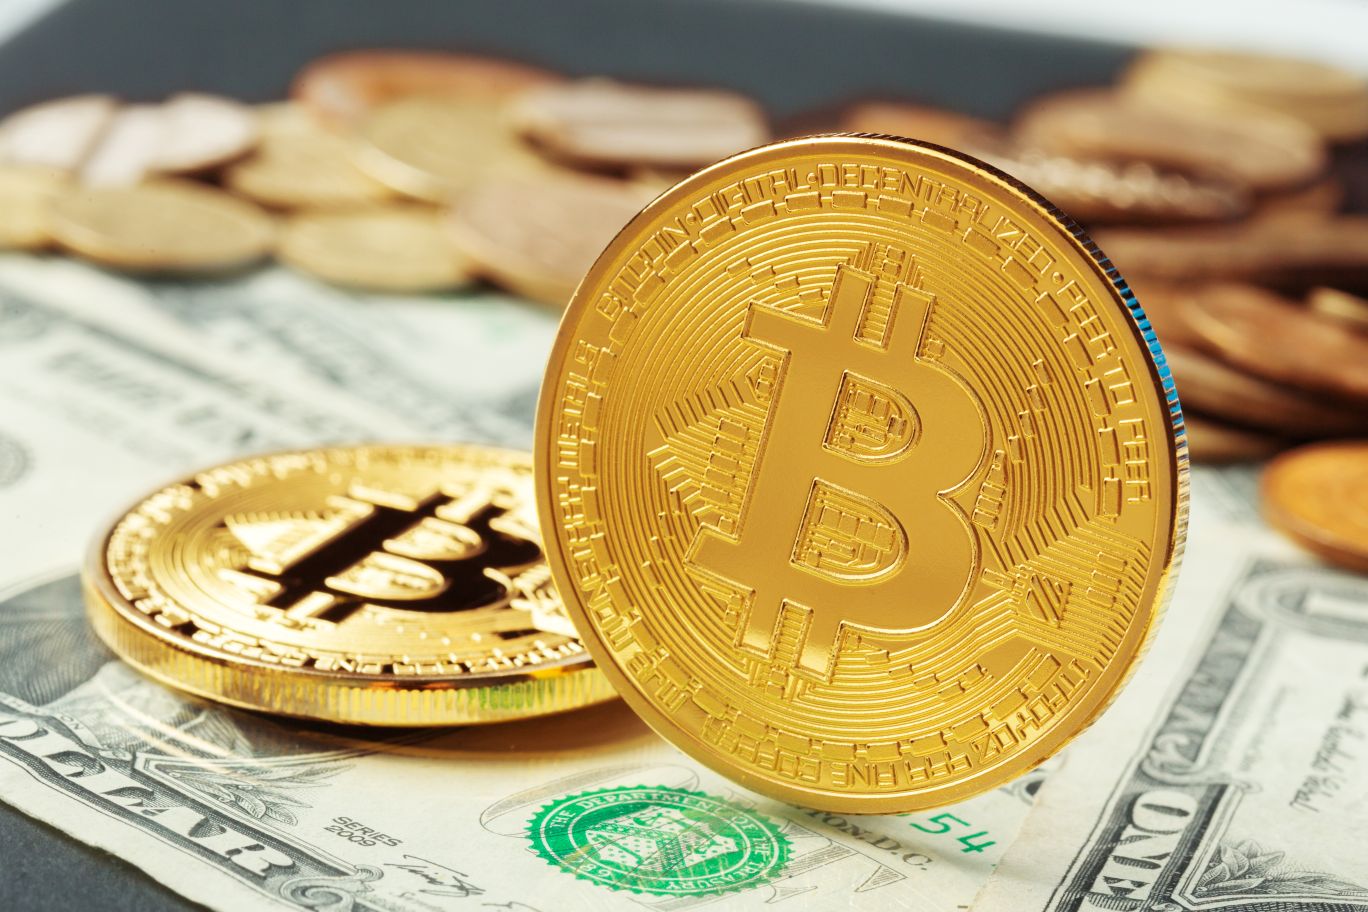 How to Make Money with Bitcoin in Nigeria (5 Proven Ways)